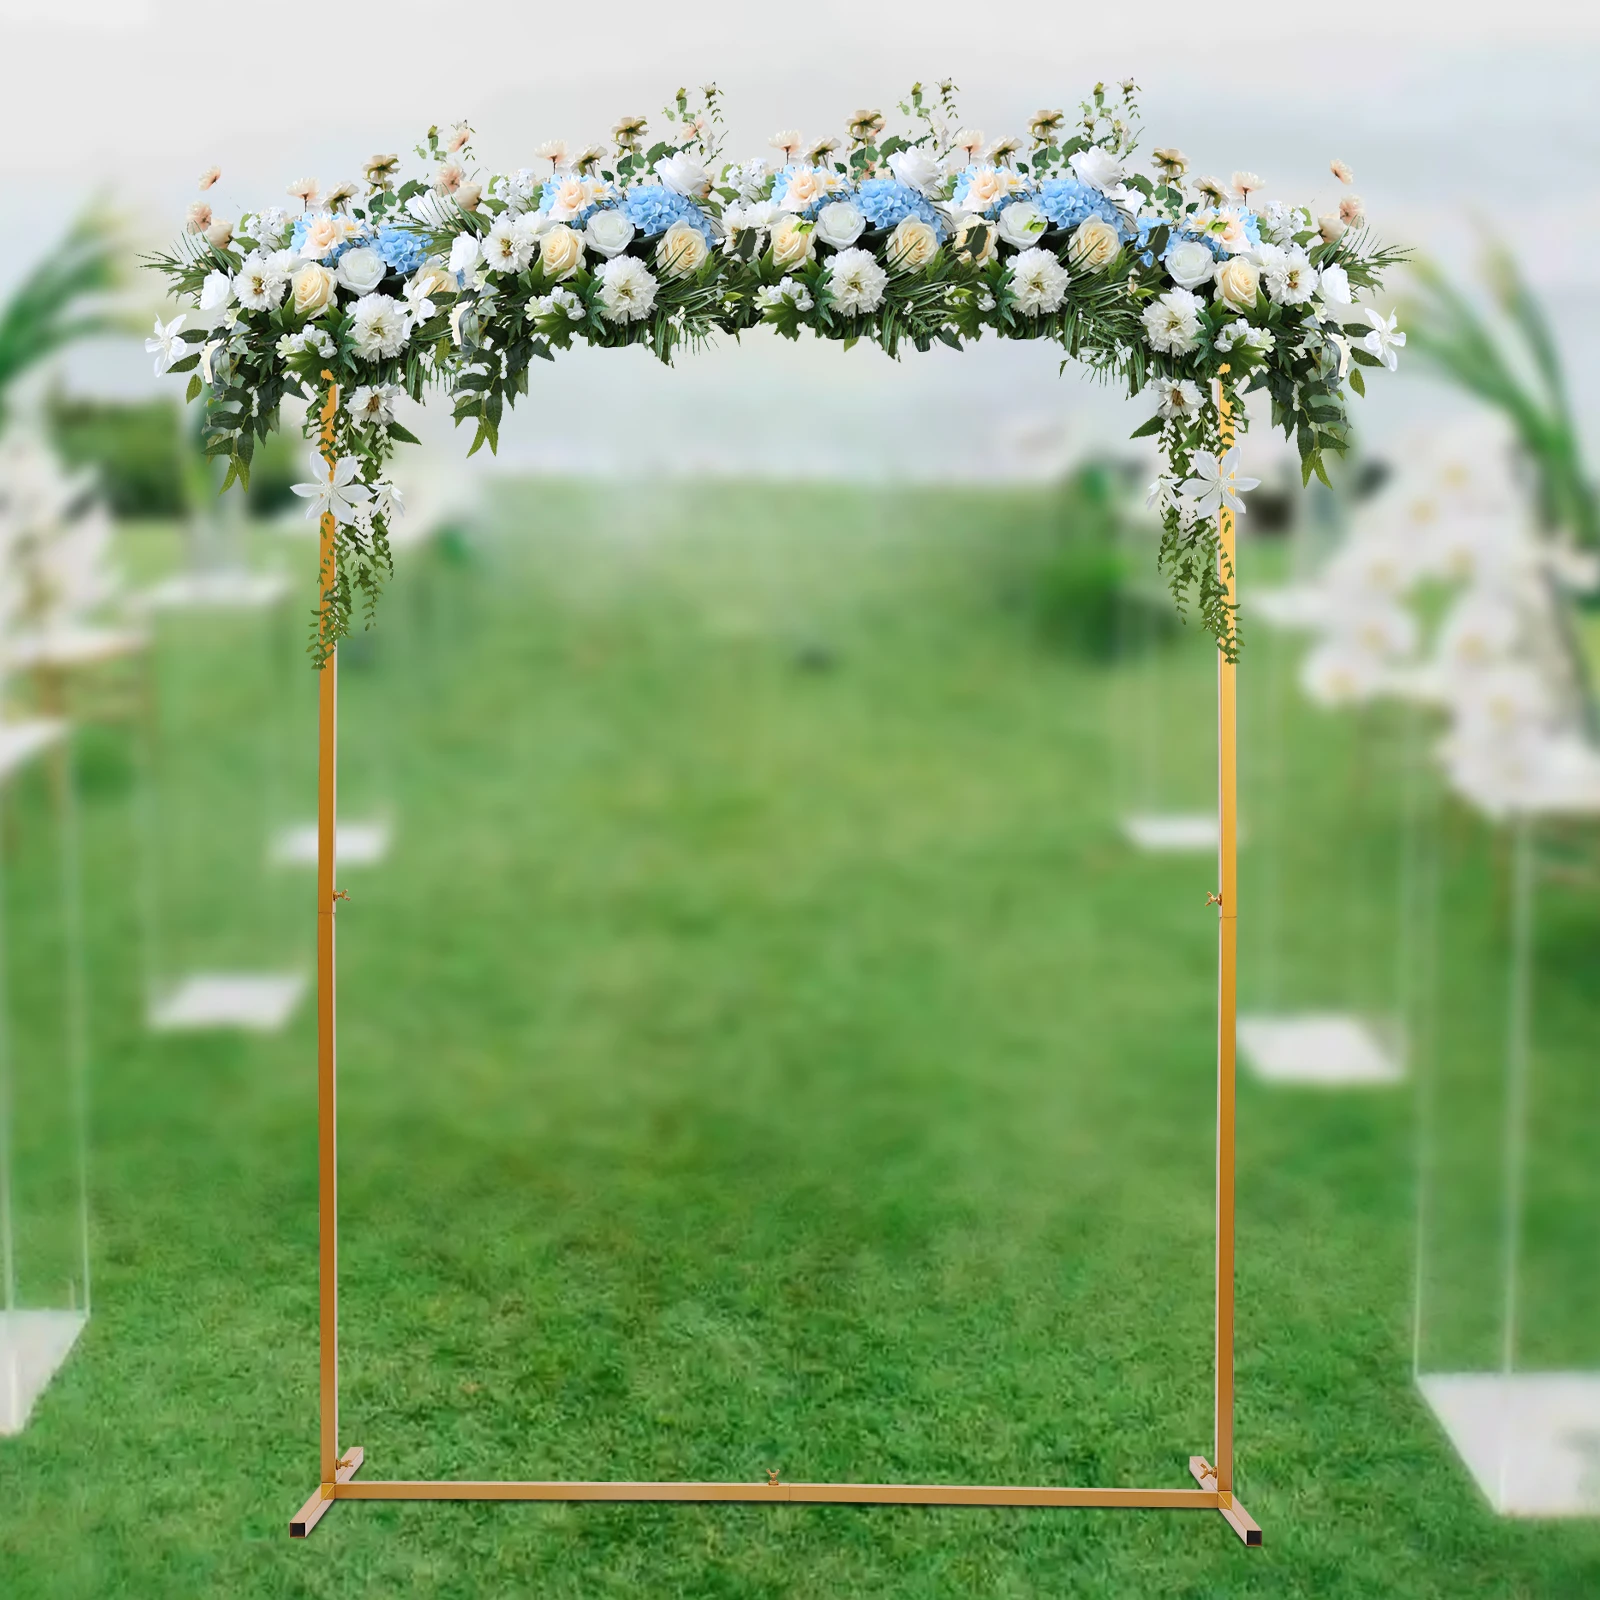 

Square Wedding Iron Arch Flower Stand Balloon Backdrop Frame Event Decoration for Weddings Birthday Parties Anniversaris